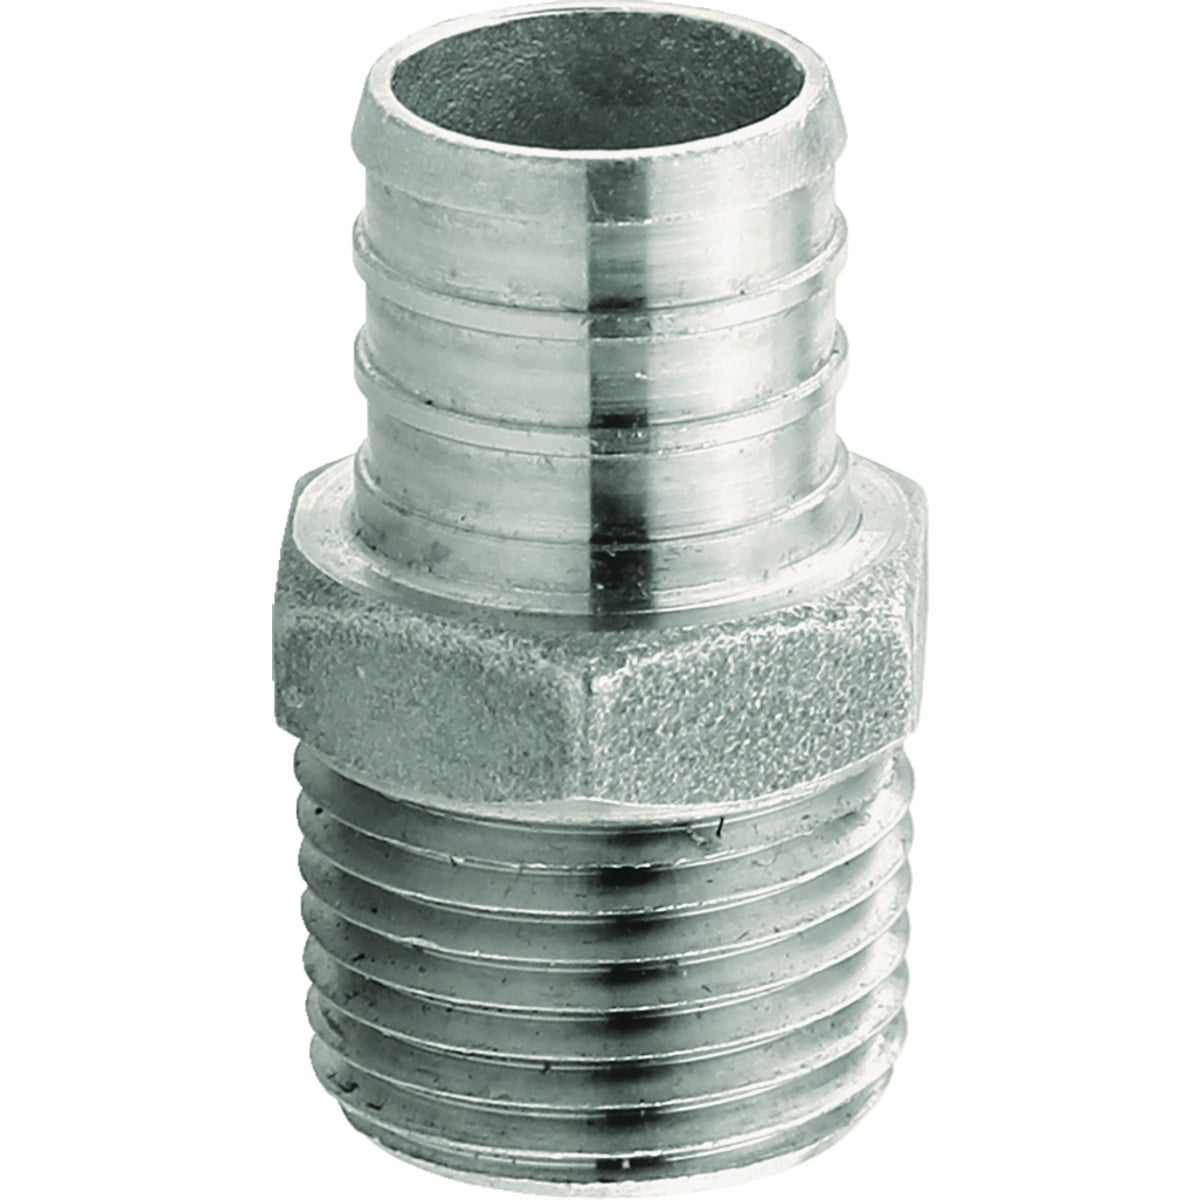 Plumbeez 3/4 In. x 1/2 In. MPT Stainless Steel PEX Adapter